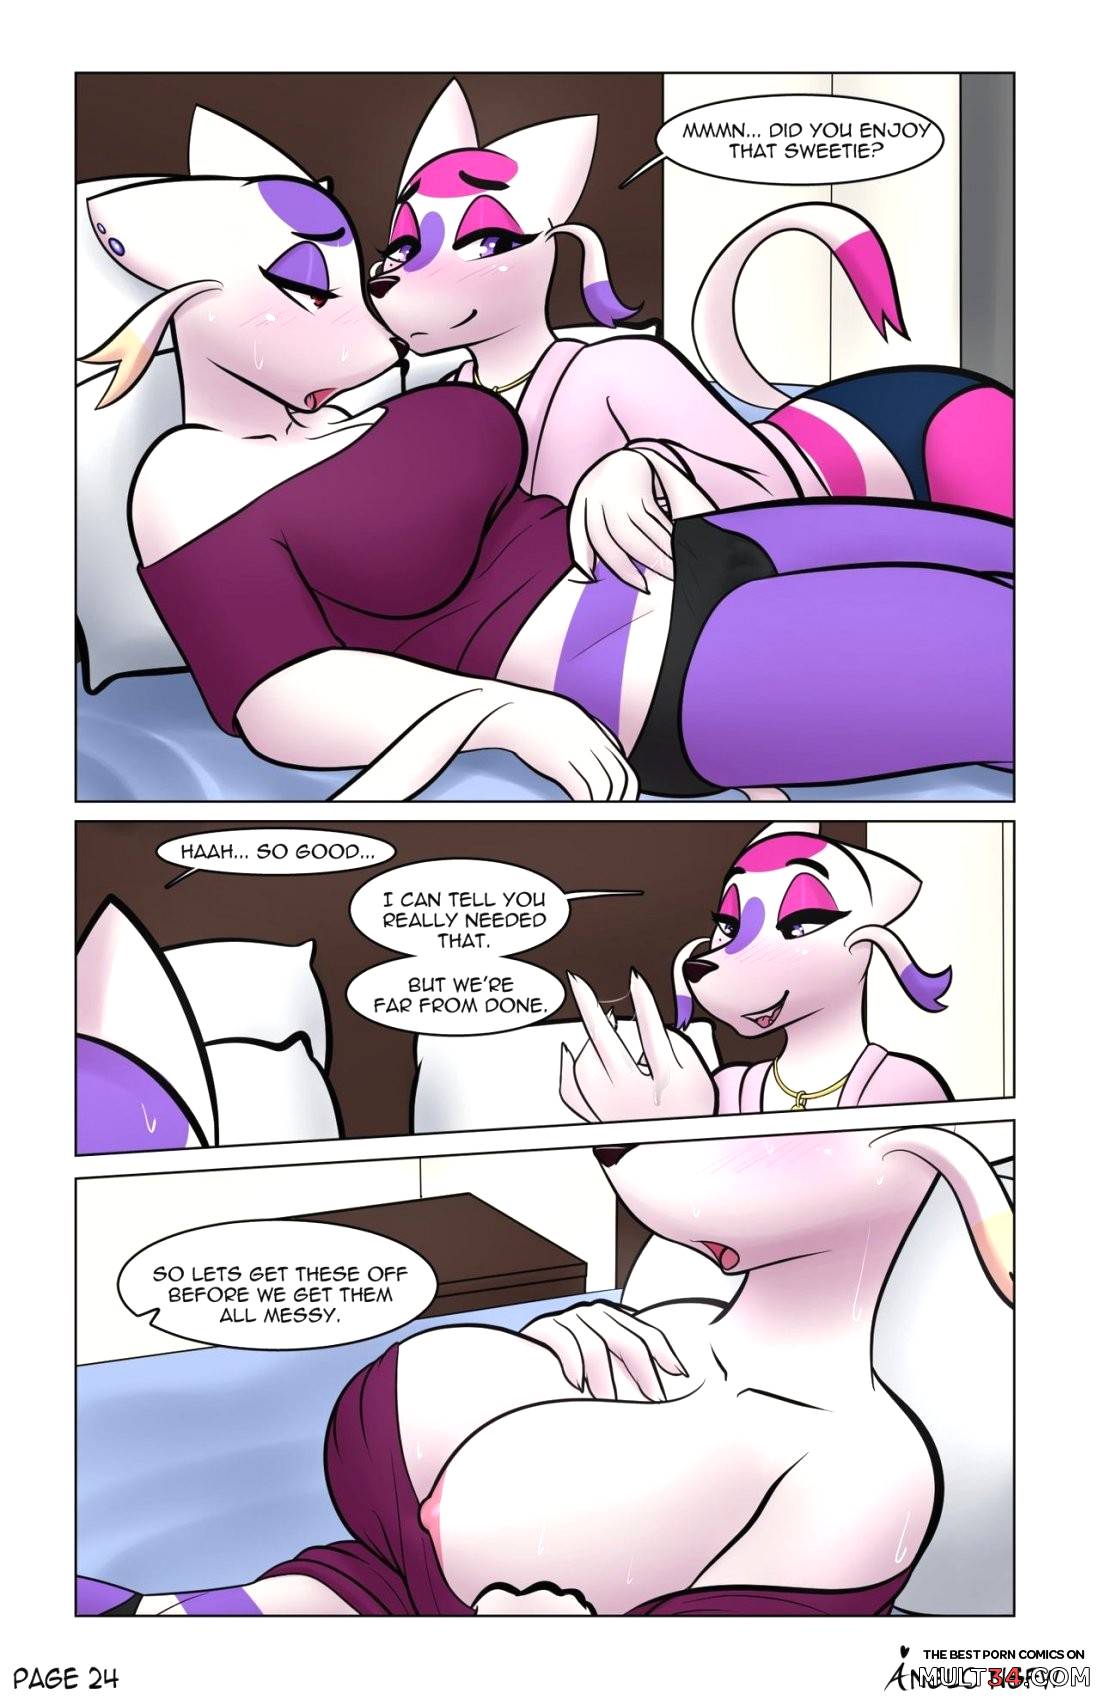 Dating Advice page 24